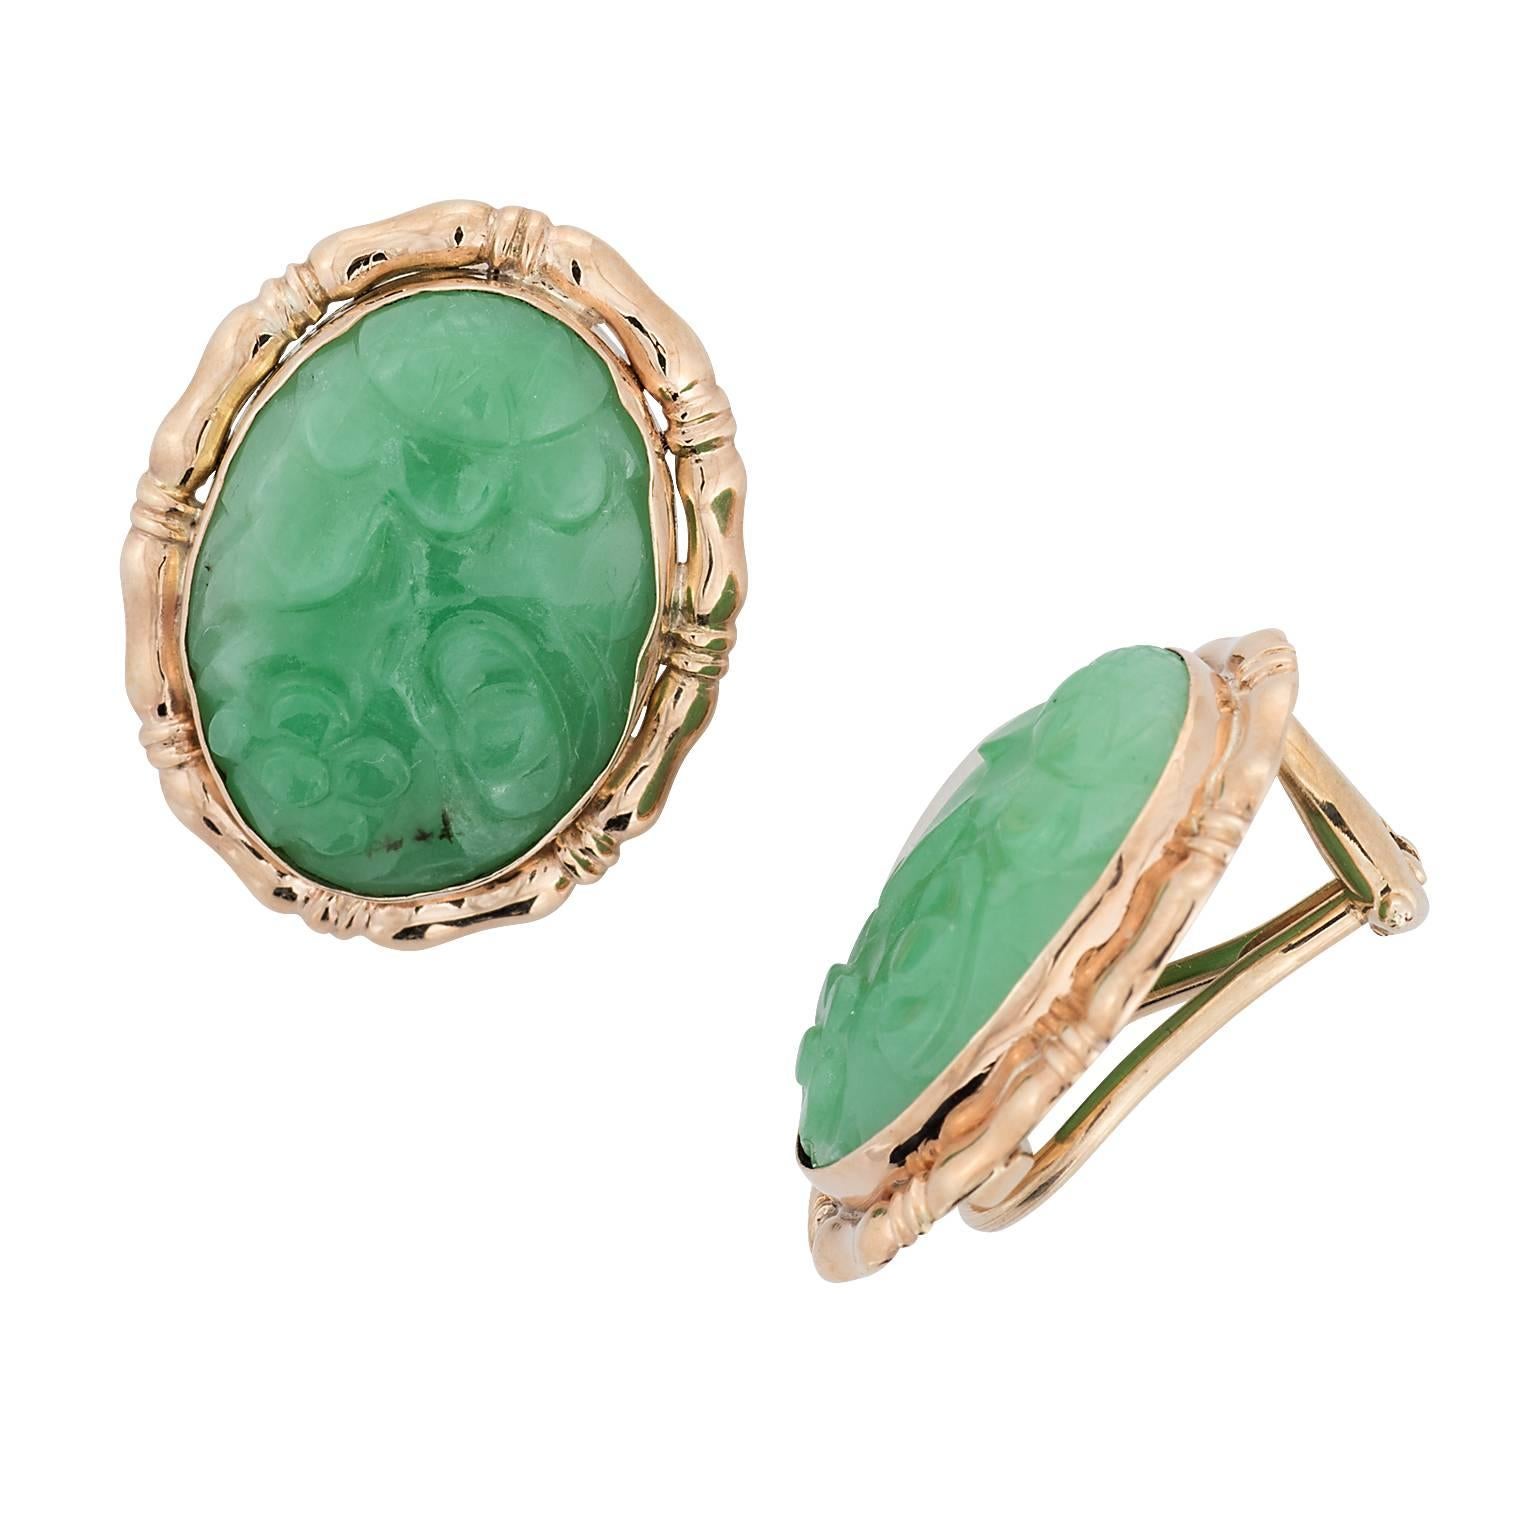 Craved Jade and 14k yellow gold earrings.  The jade depicts a floral scenery, bezel set with a textured frame, and a clip on back.  The jade measures approximately 18.30 x 13.60 millimeters.

Hall mark:  14K
**Post can be added 